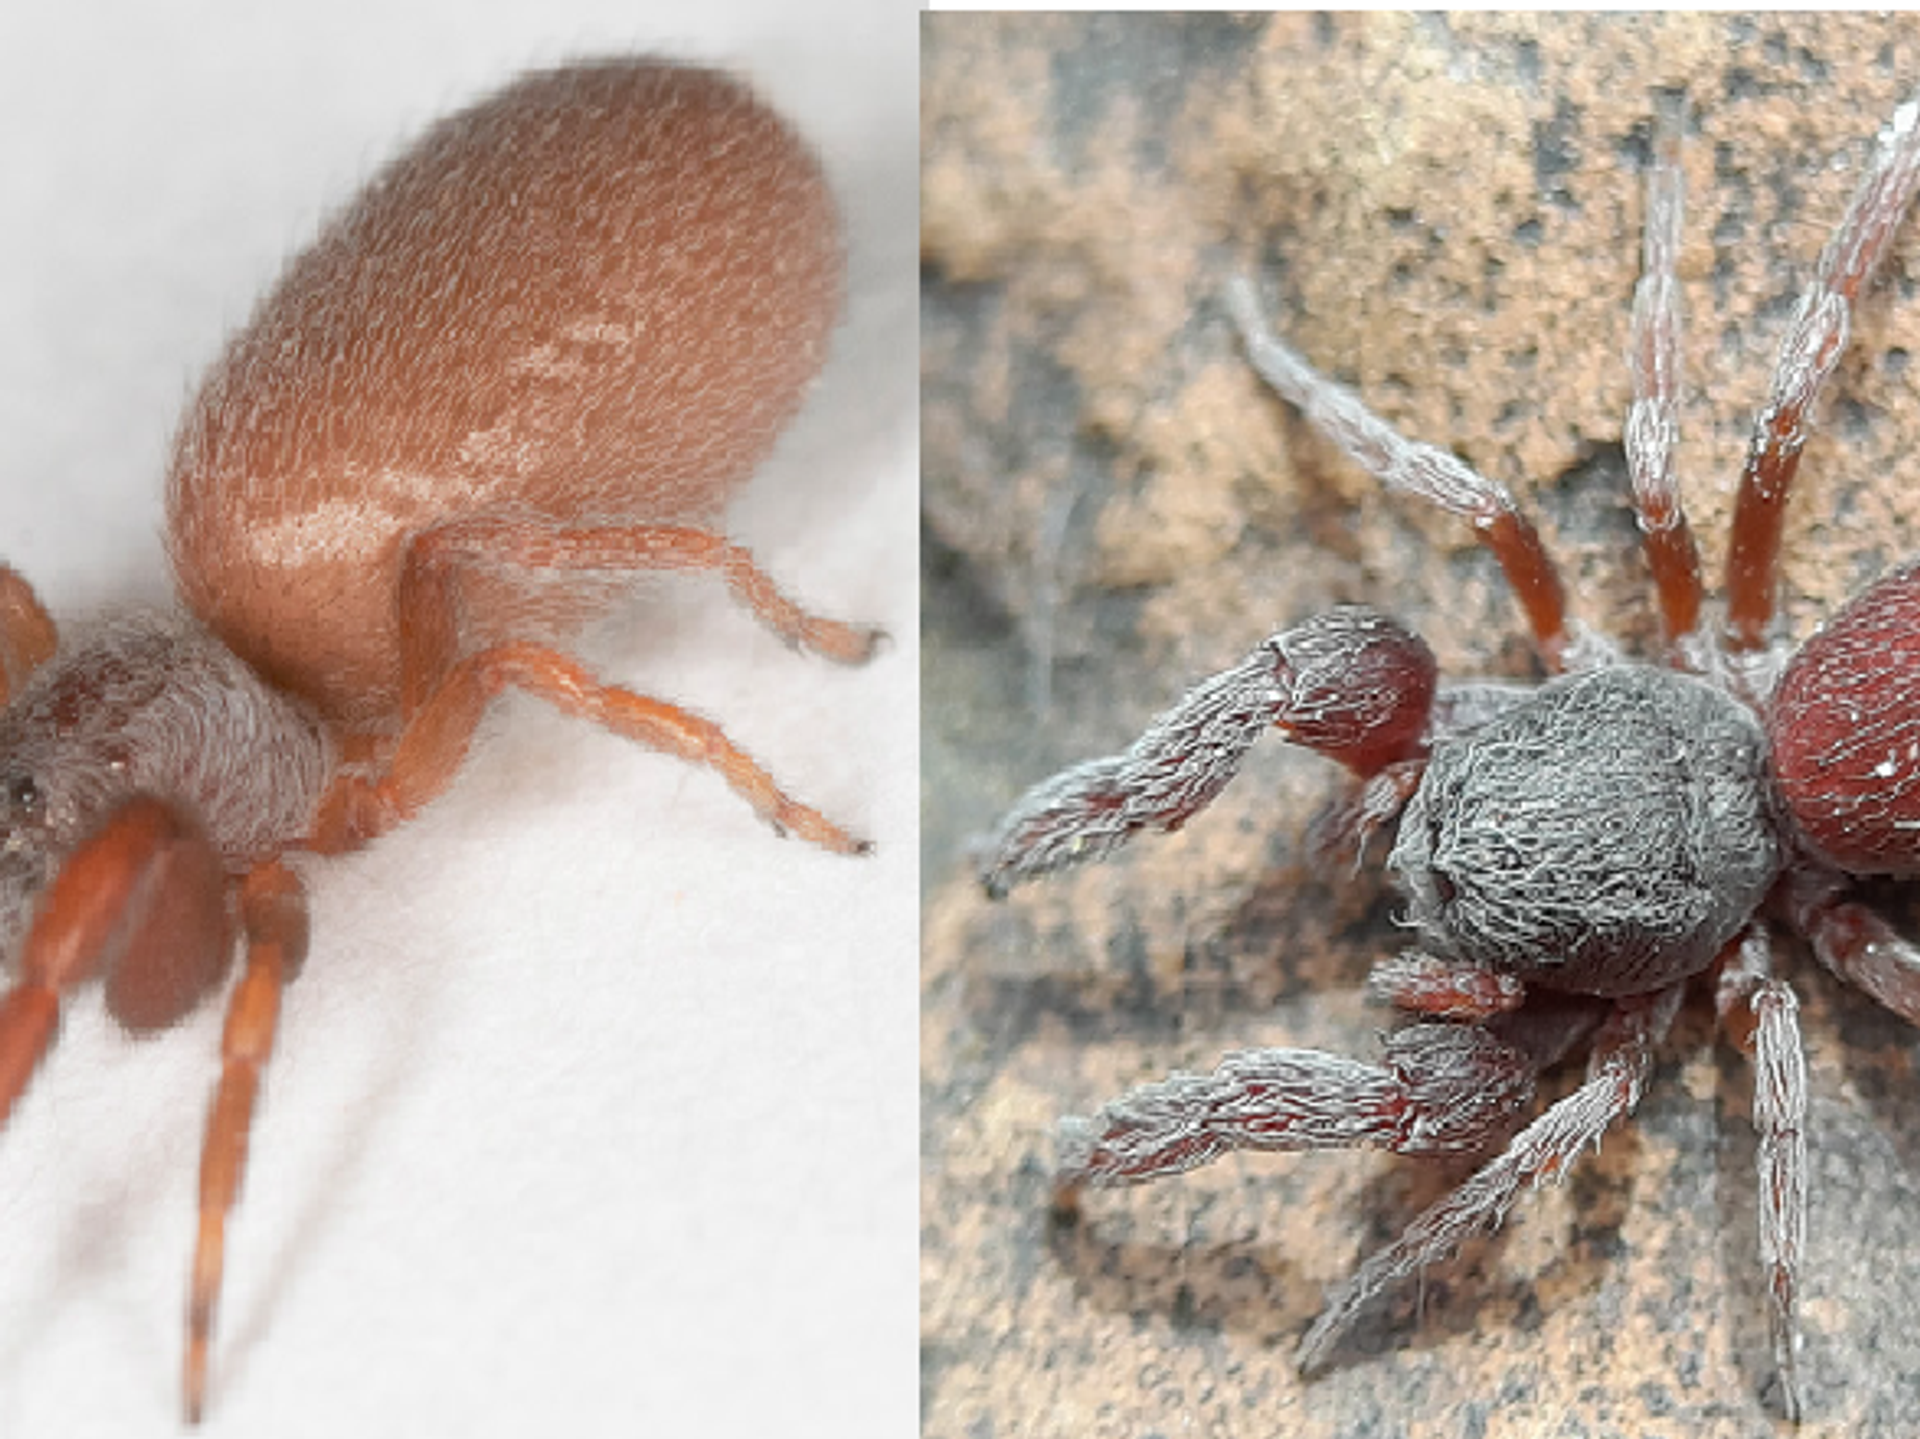 Researchers discover new spider species in Israel 